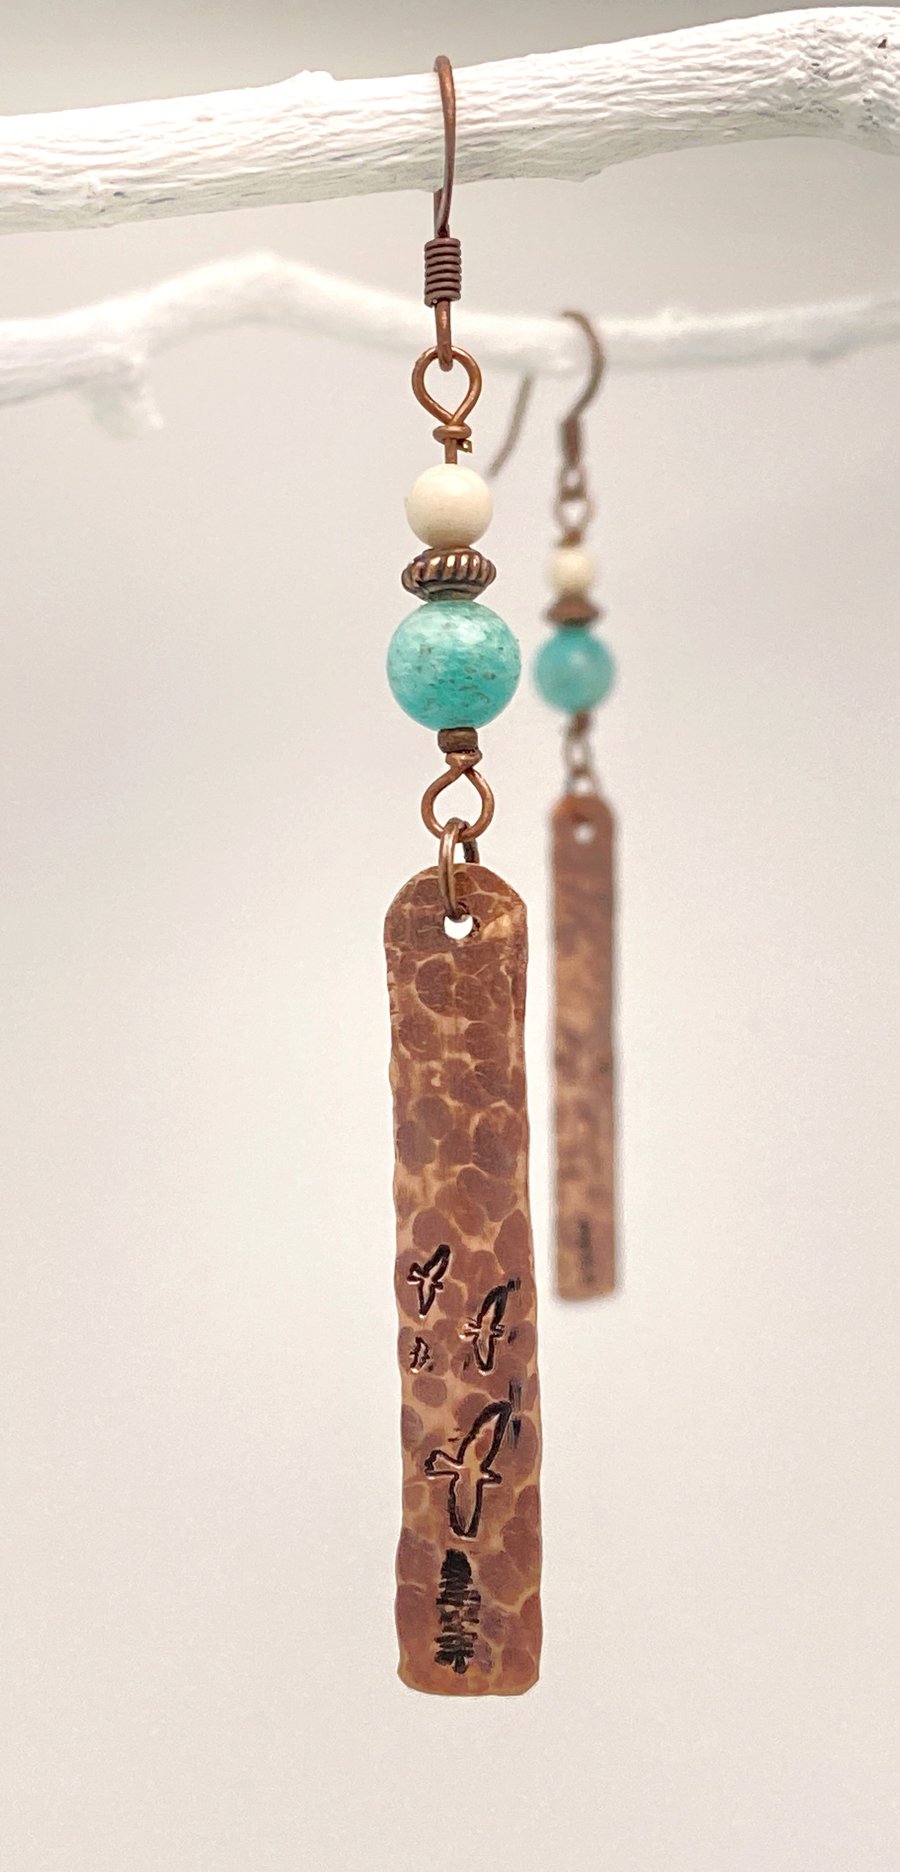  Hammered Copper Earrings Hand Stamped With Flying Birds